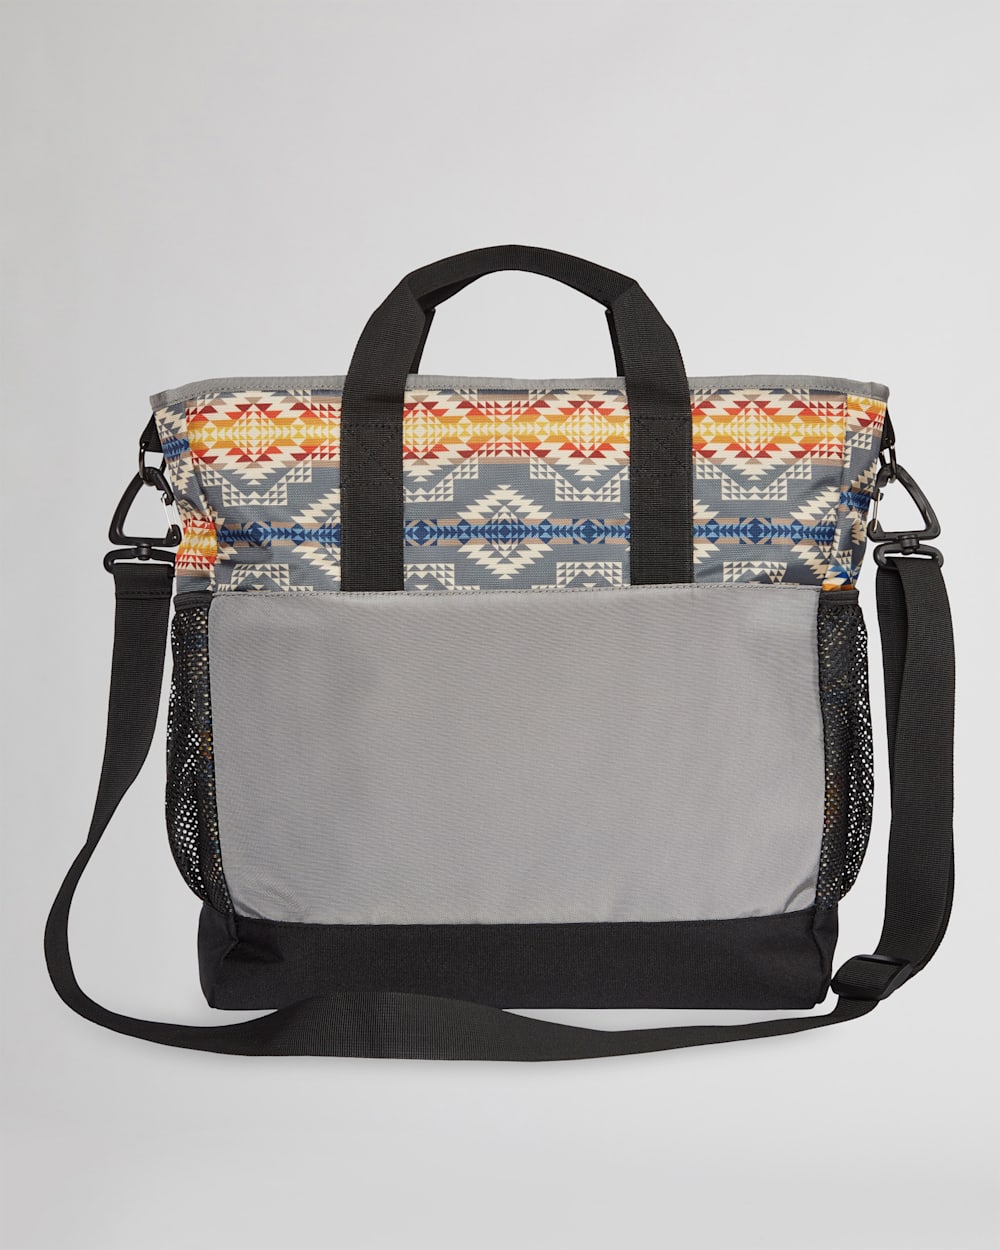 ALTERNATE VIEW OF SMITH ROCK CARRYALL TOTE IN GREY image number 2